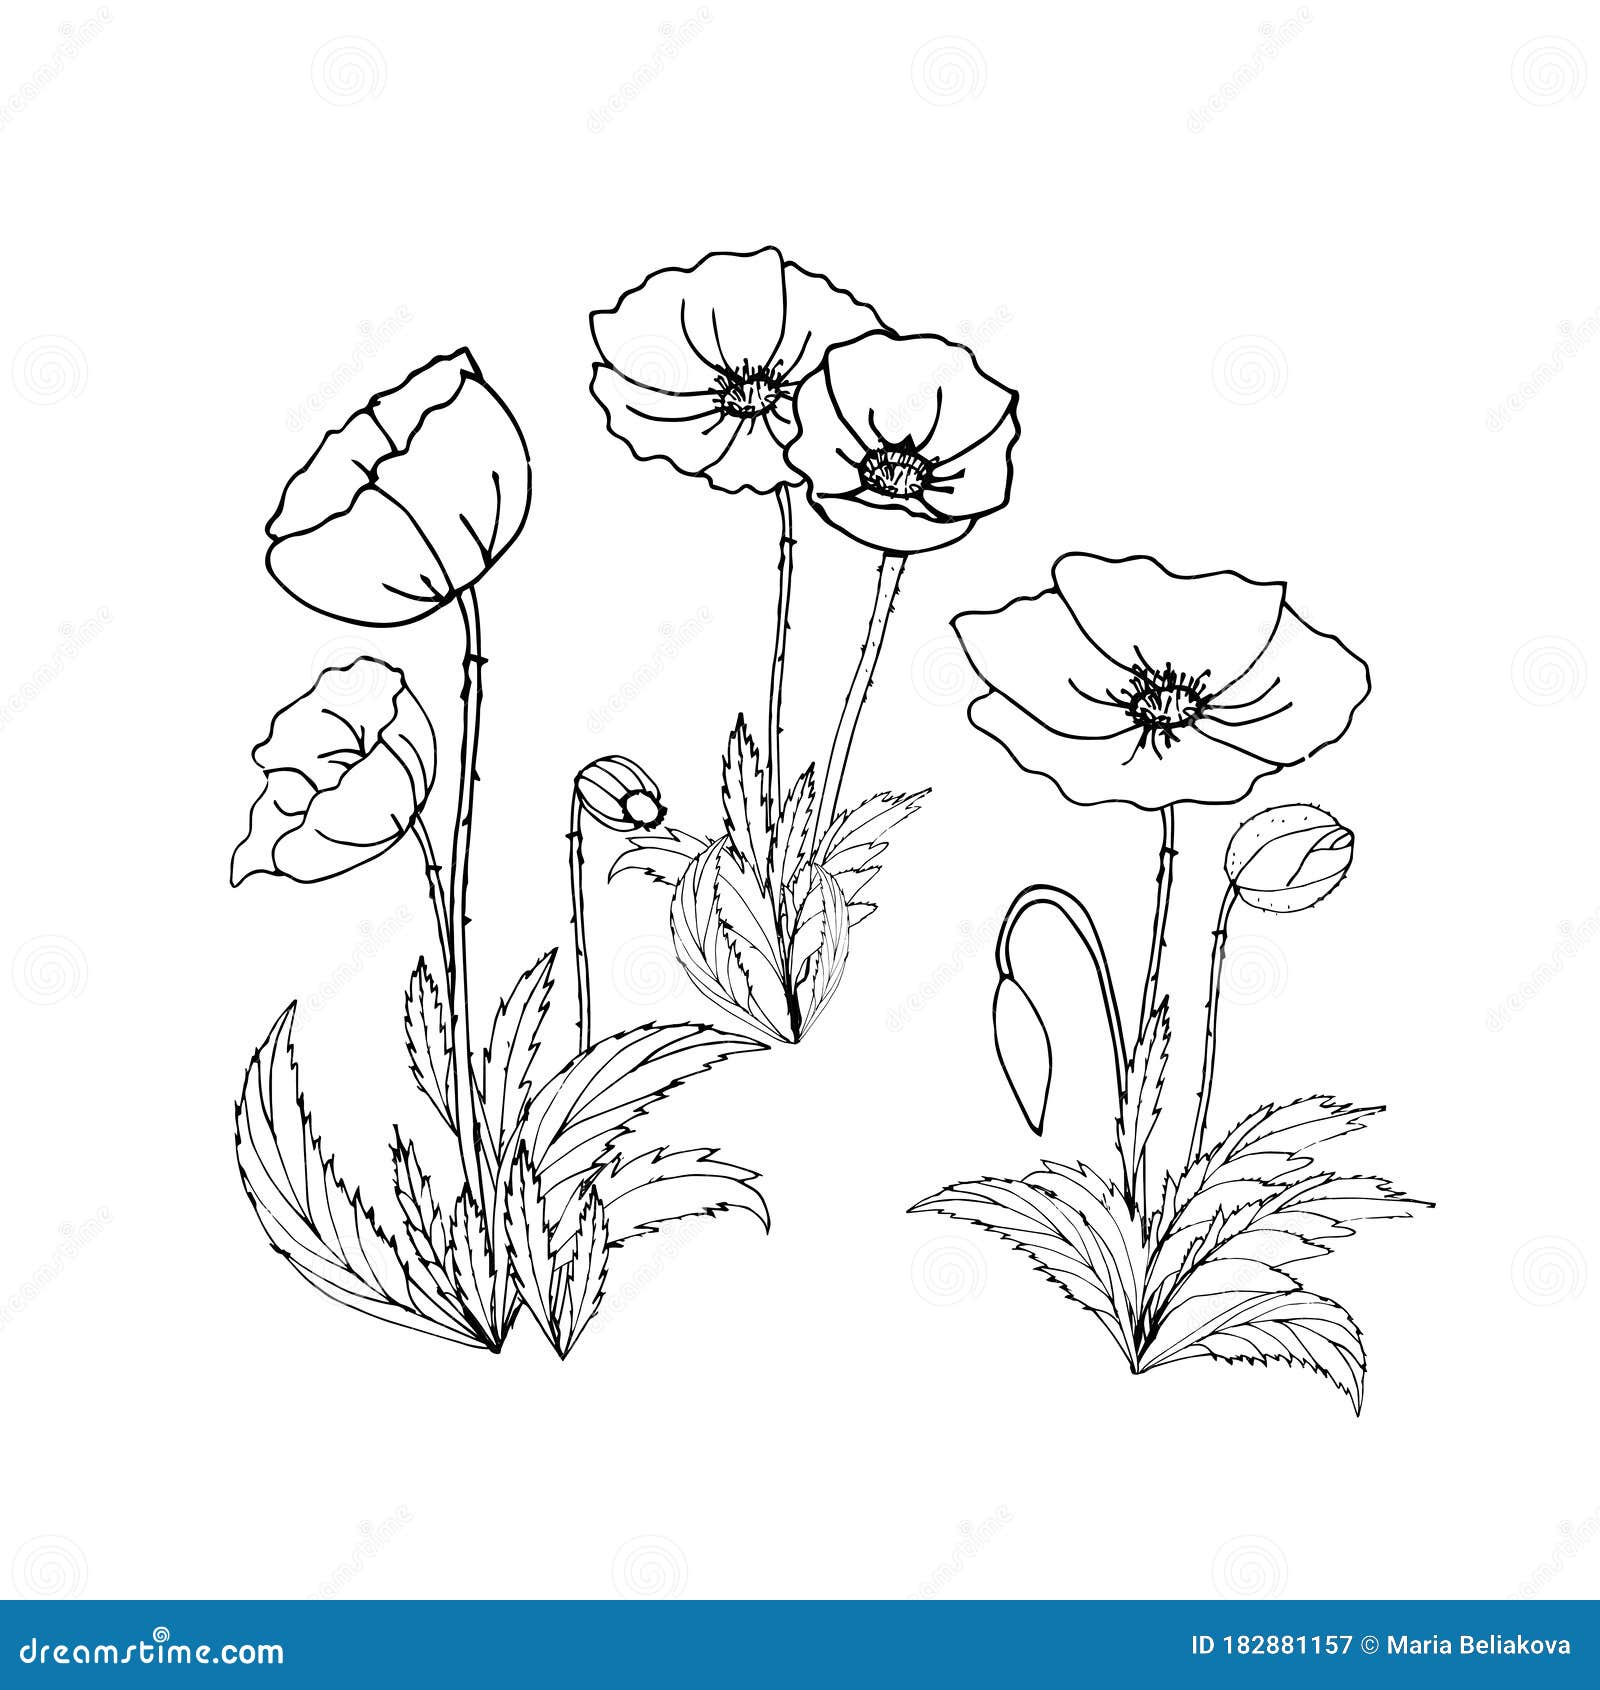 Coloring. Pencil-drawn Poppies. Botanical Drawing of Poppies, Buds ...